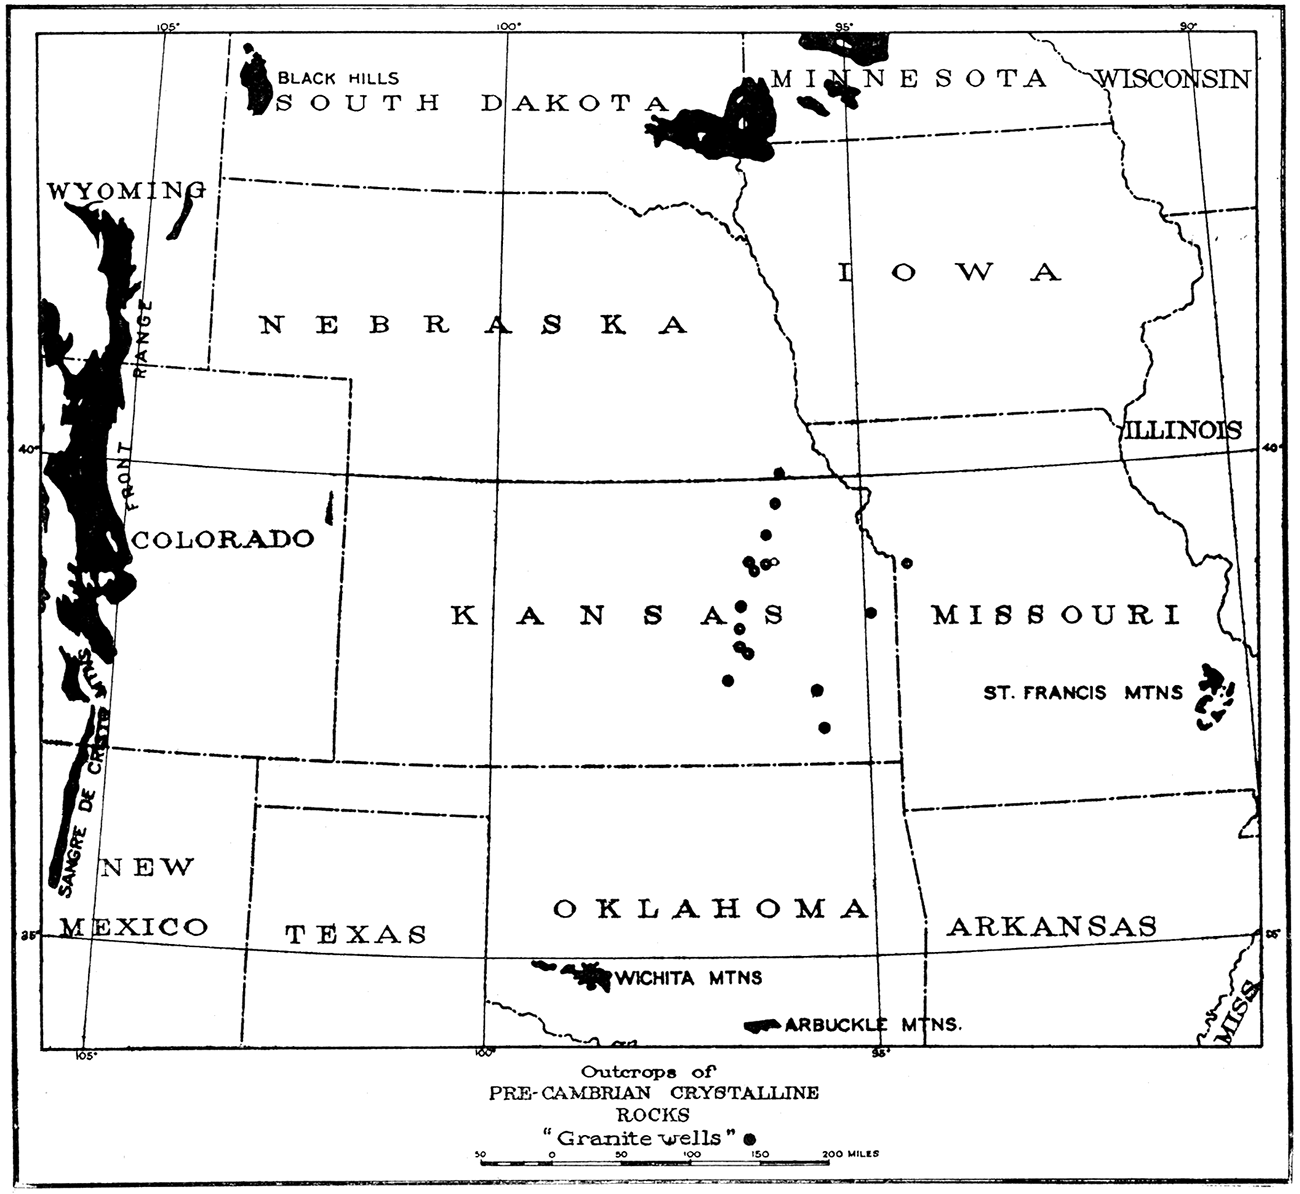 General index map showing outcrops of the Pre-Cambrian crystalline rocks and location of granite wells in Kansas.